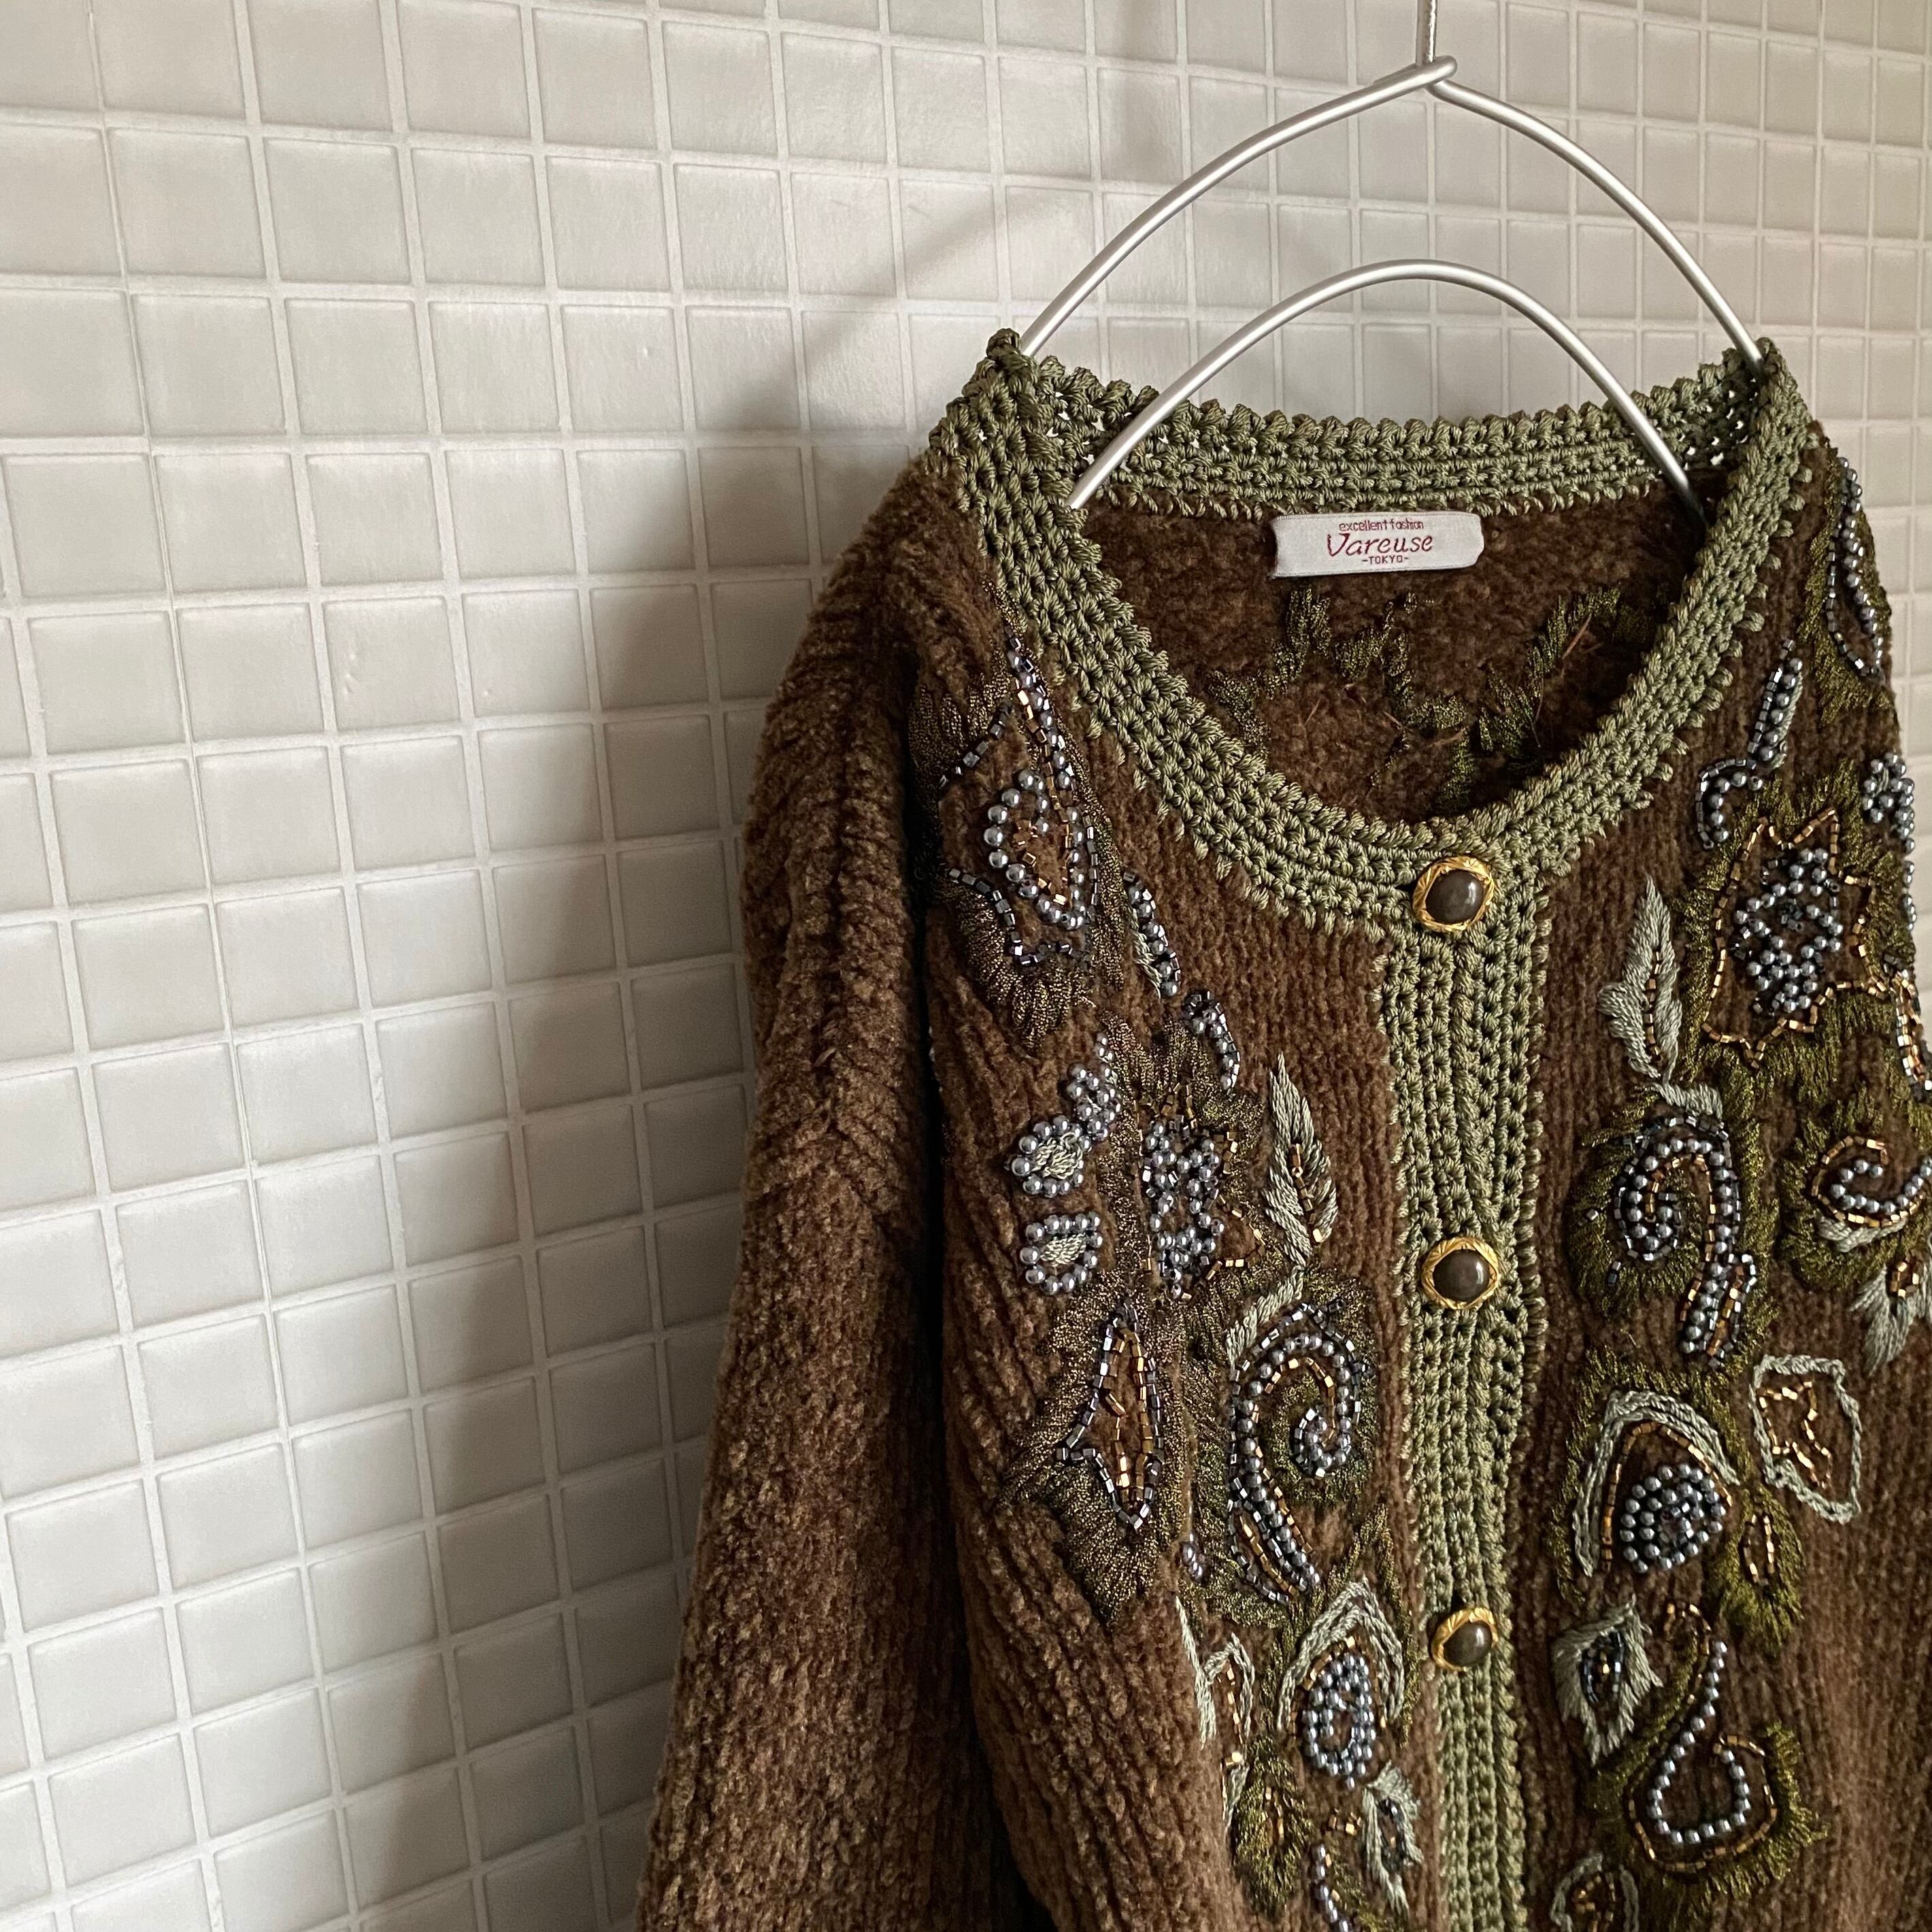 Vintage 70s〜80s retro botanical beads embroidery knit cardigan レトロ ヴィンテージ  古着 ボタニカル ビーズ刺繍 カーディガン